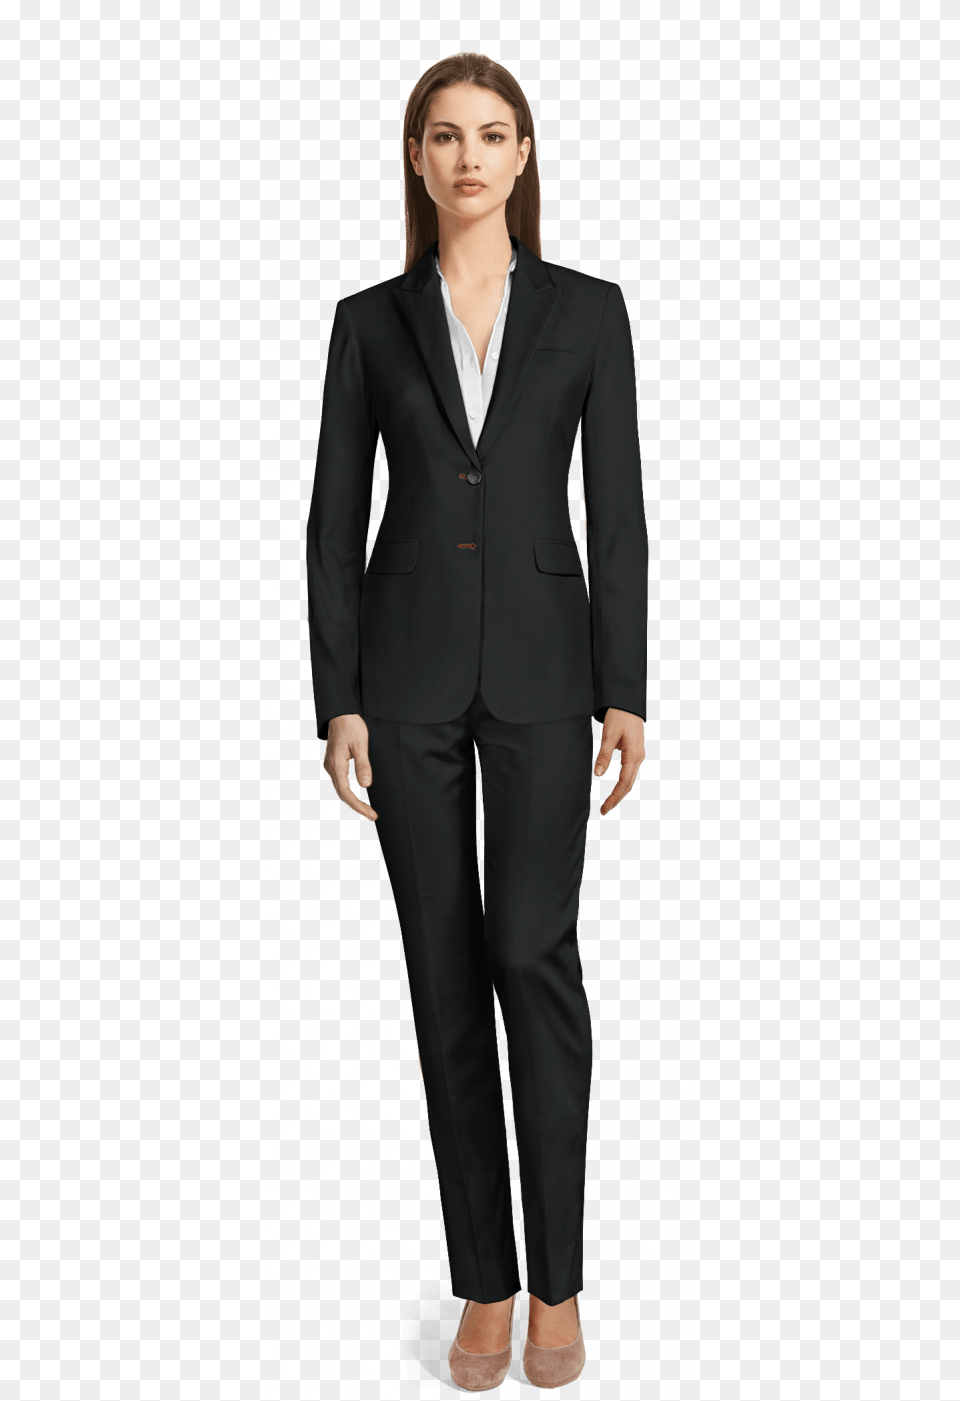 Transparent Black Man In Suit Whole Body Formal Attire For Women, Tuxedo, Clothing, Formal Wear, Coat Free Png Download